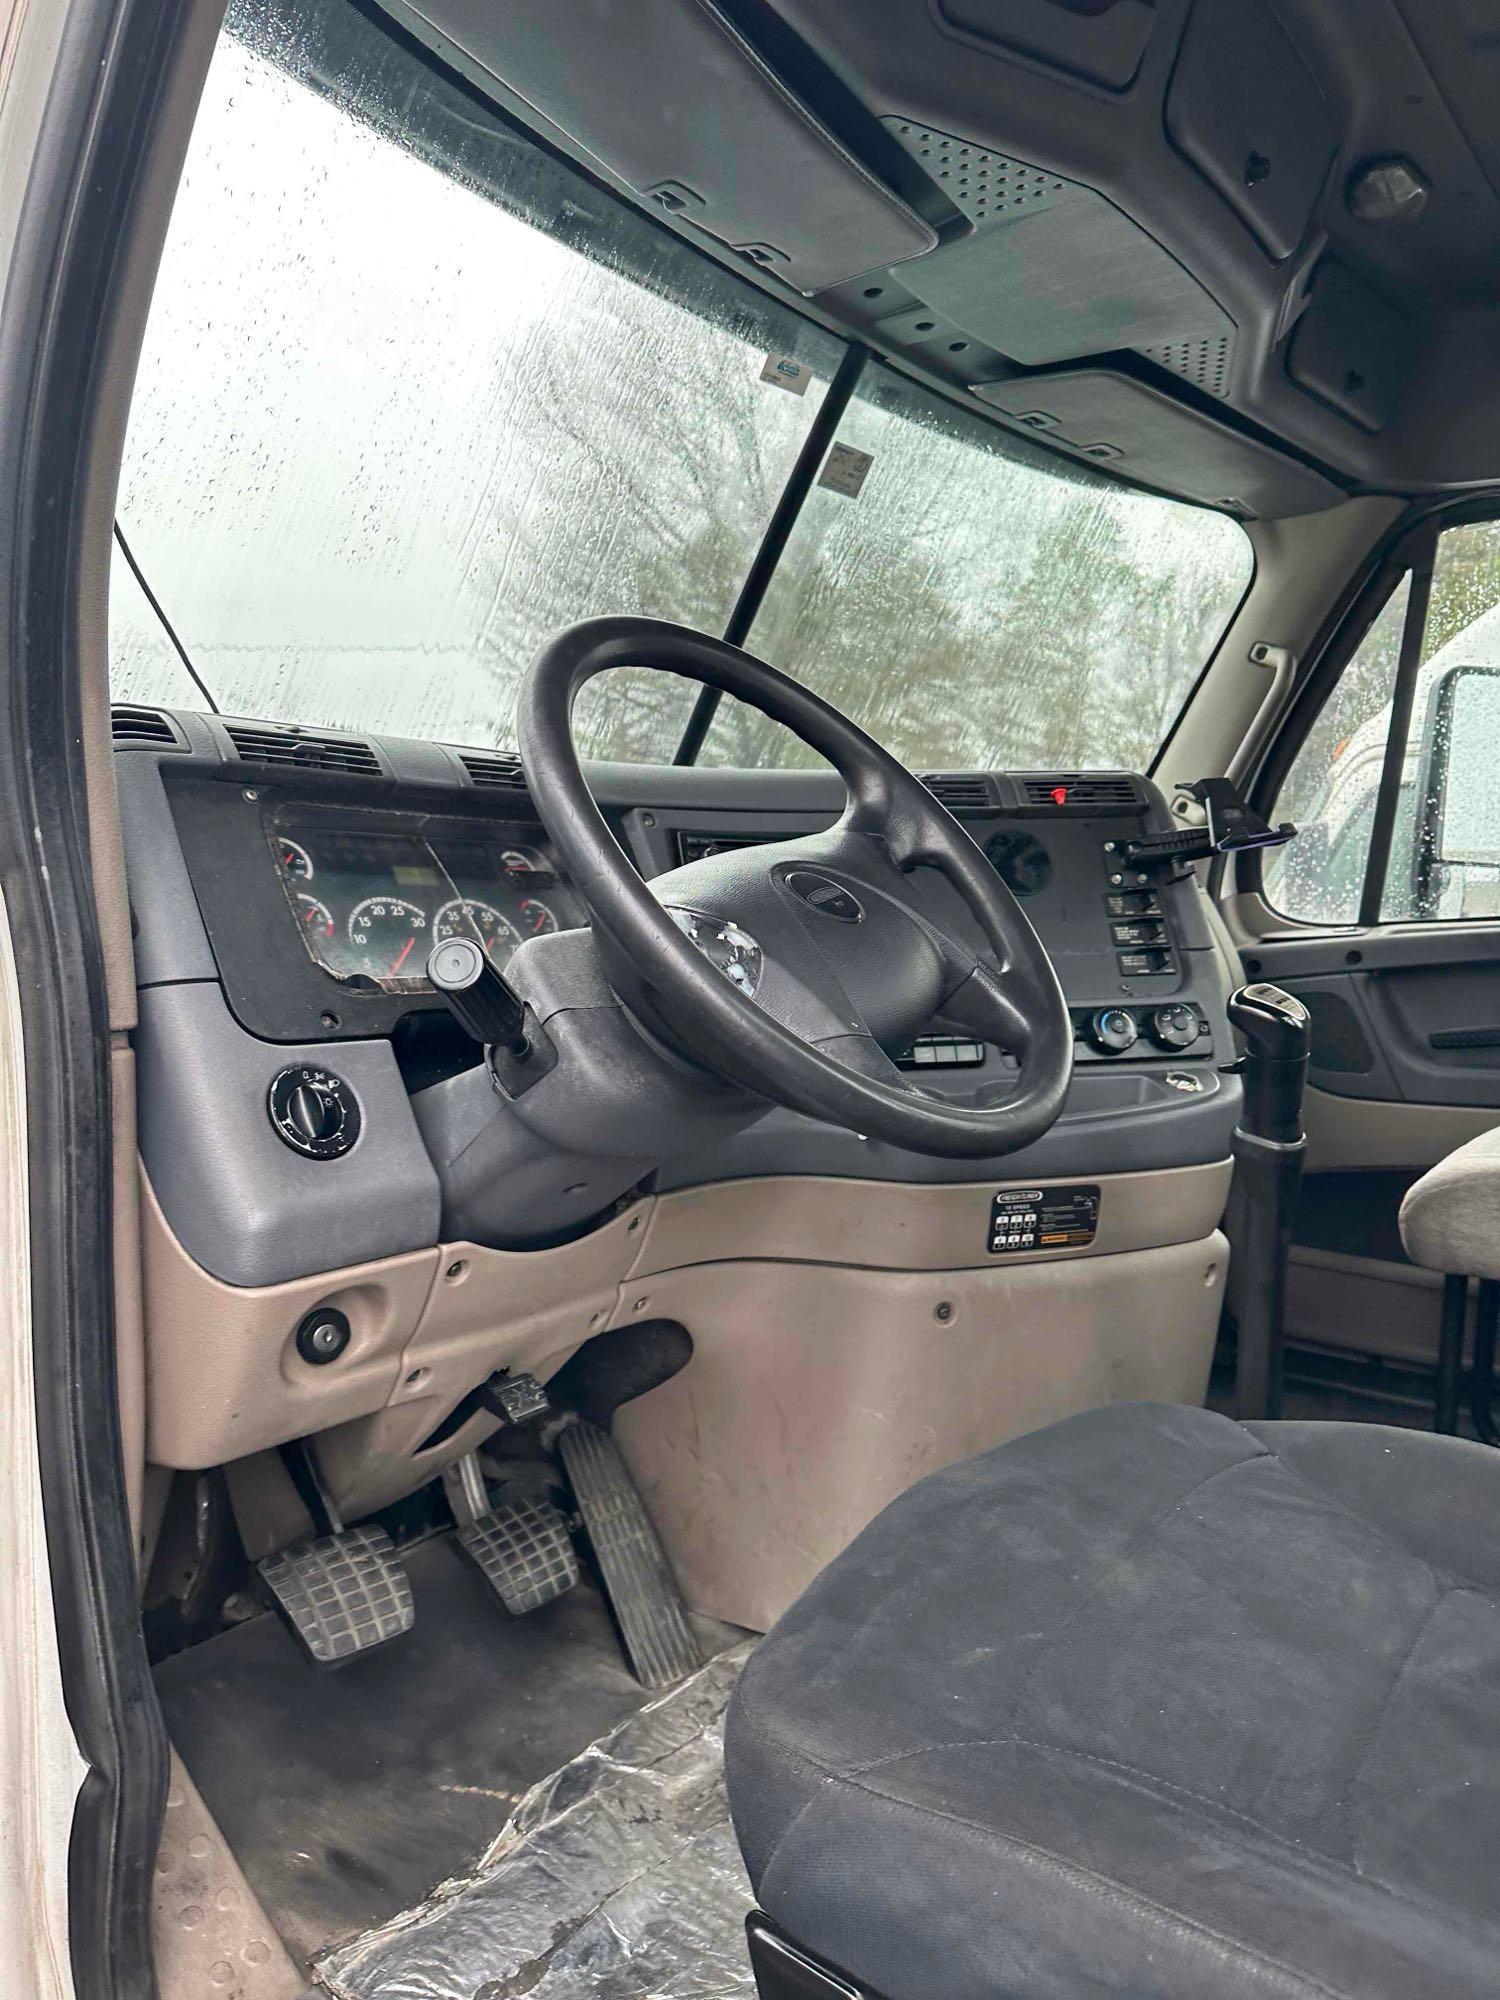 2012 FREIGHTLINER CASCADIA T/A TRUCK TRACTOR